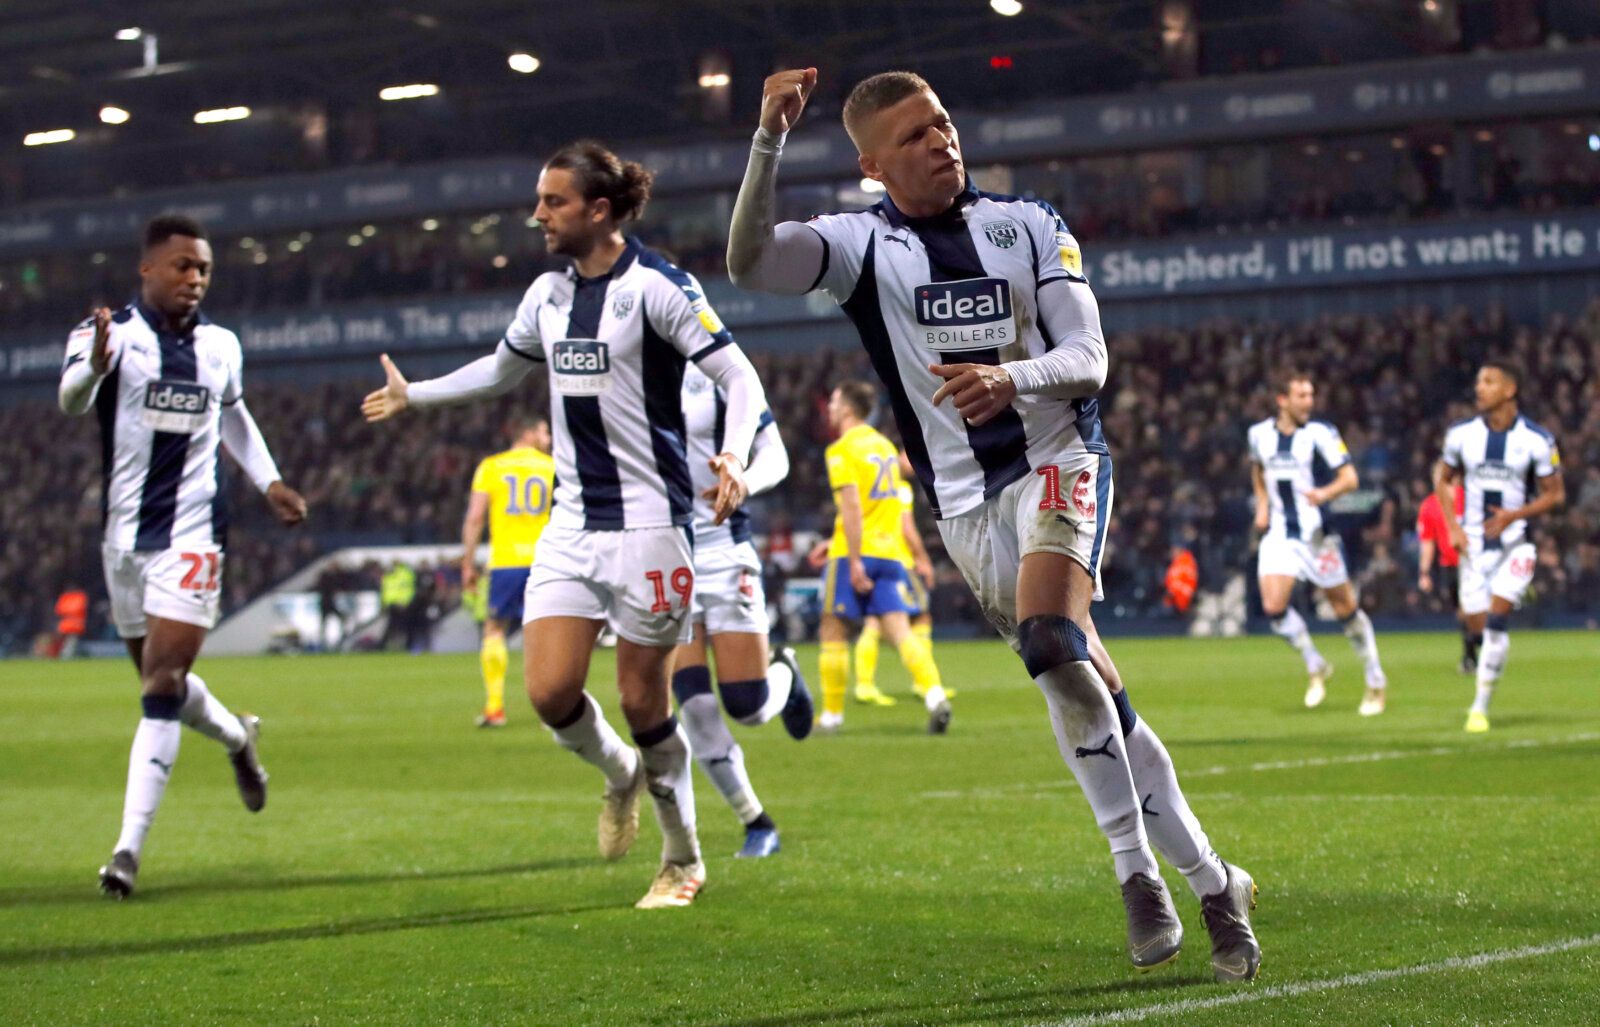 Soccer Football - Championship - West Bromwich Albion v Birmingham City - The Hawthorns, West Bromwich, Britain - March 29, 2019   West Bromwich Albion's Dwight Gayle celebrates after scoring their first goal   Action Images/Andrew Boyers    EDITORIAL USE ONLY. No use with unauthorized audio, video, data, fixture lists, club/league logos or "live" services. Online in-match use limited to 75 images, no video emulation. No use in betting, games or single club/league/player publications.  Please co